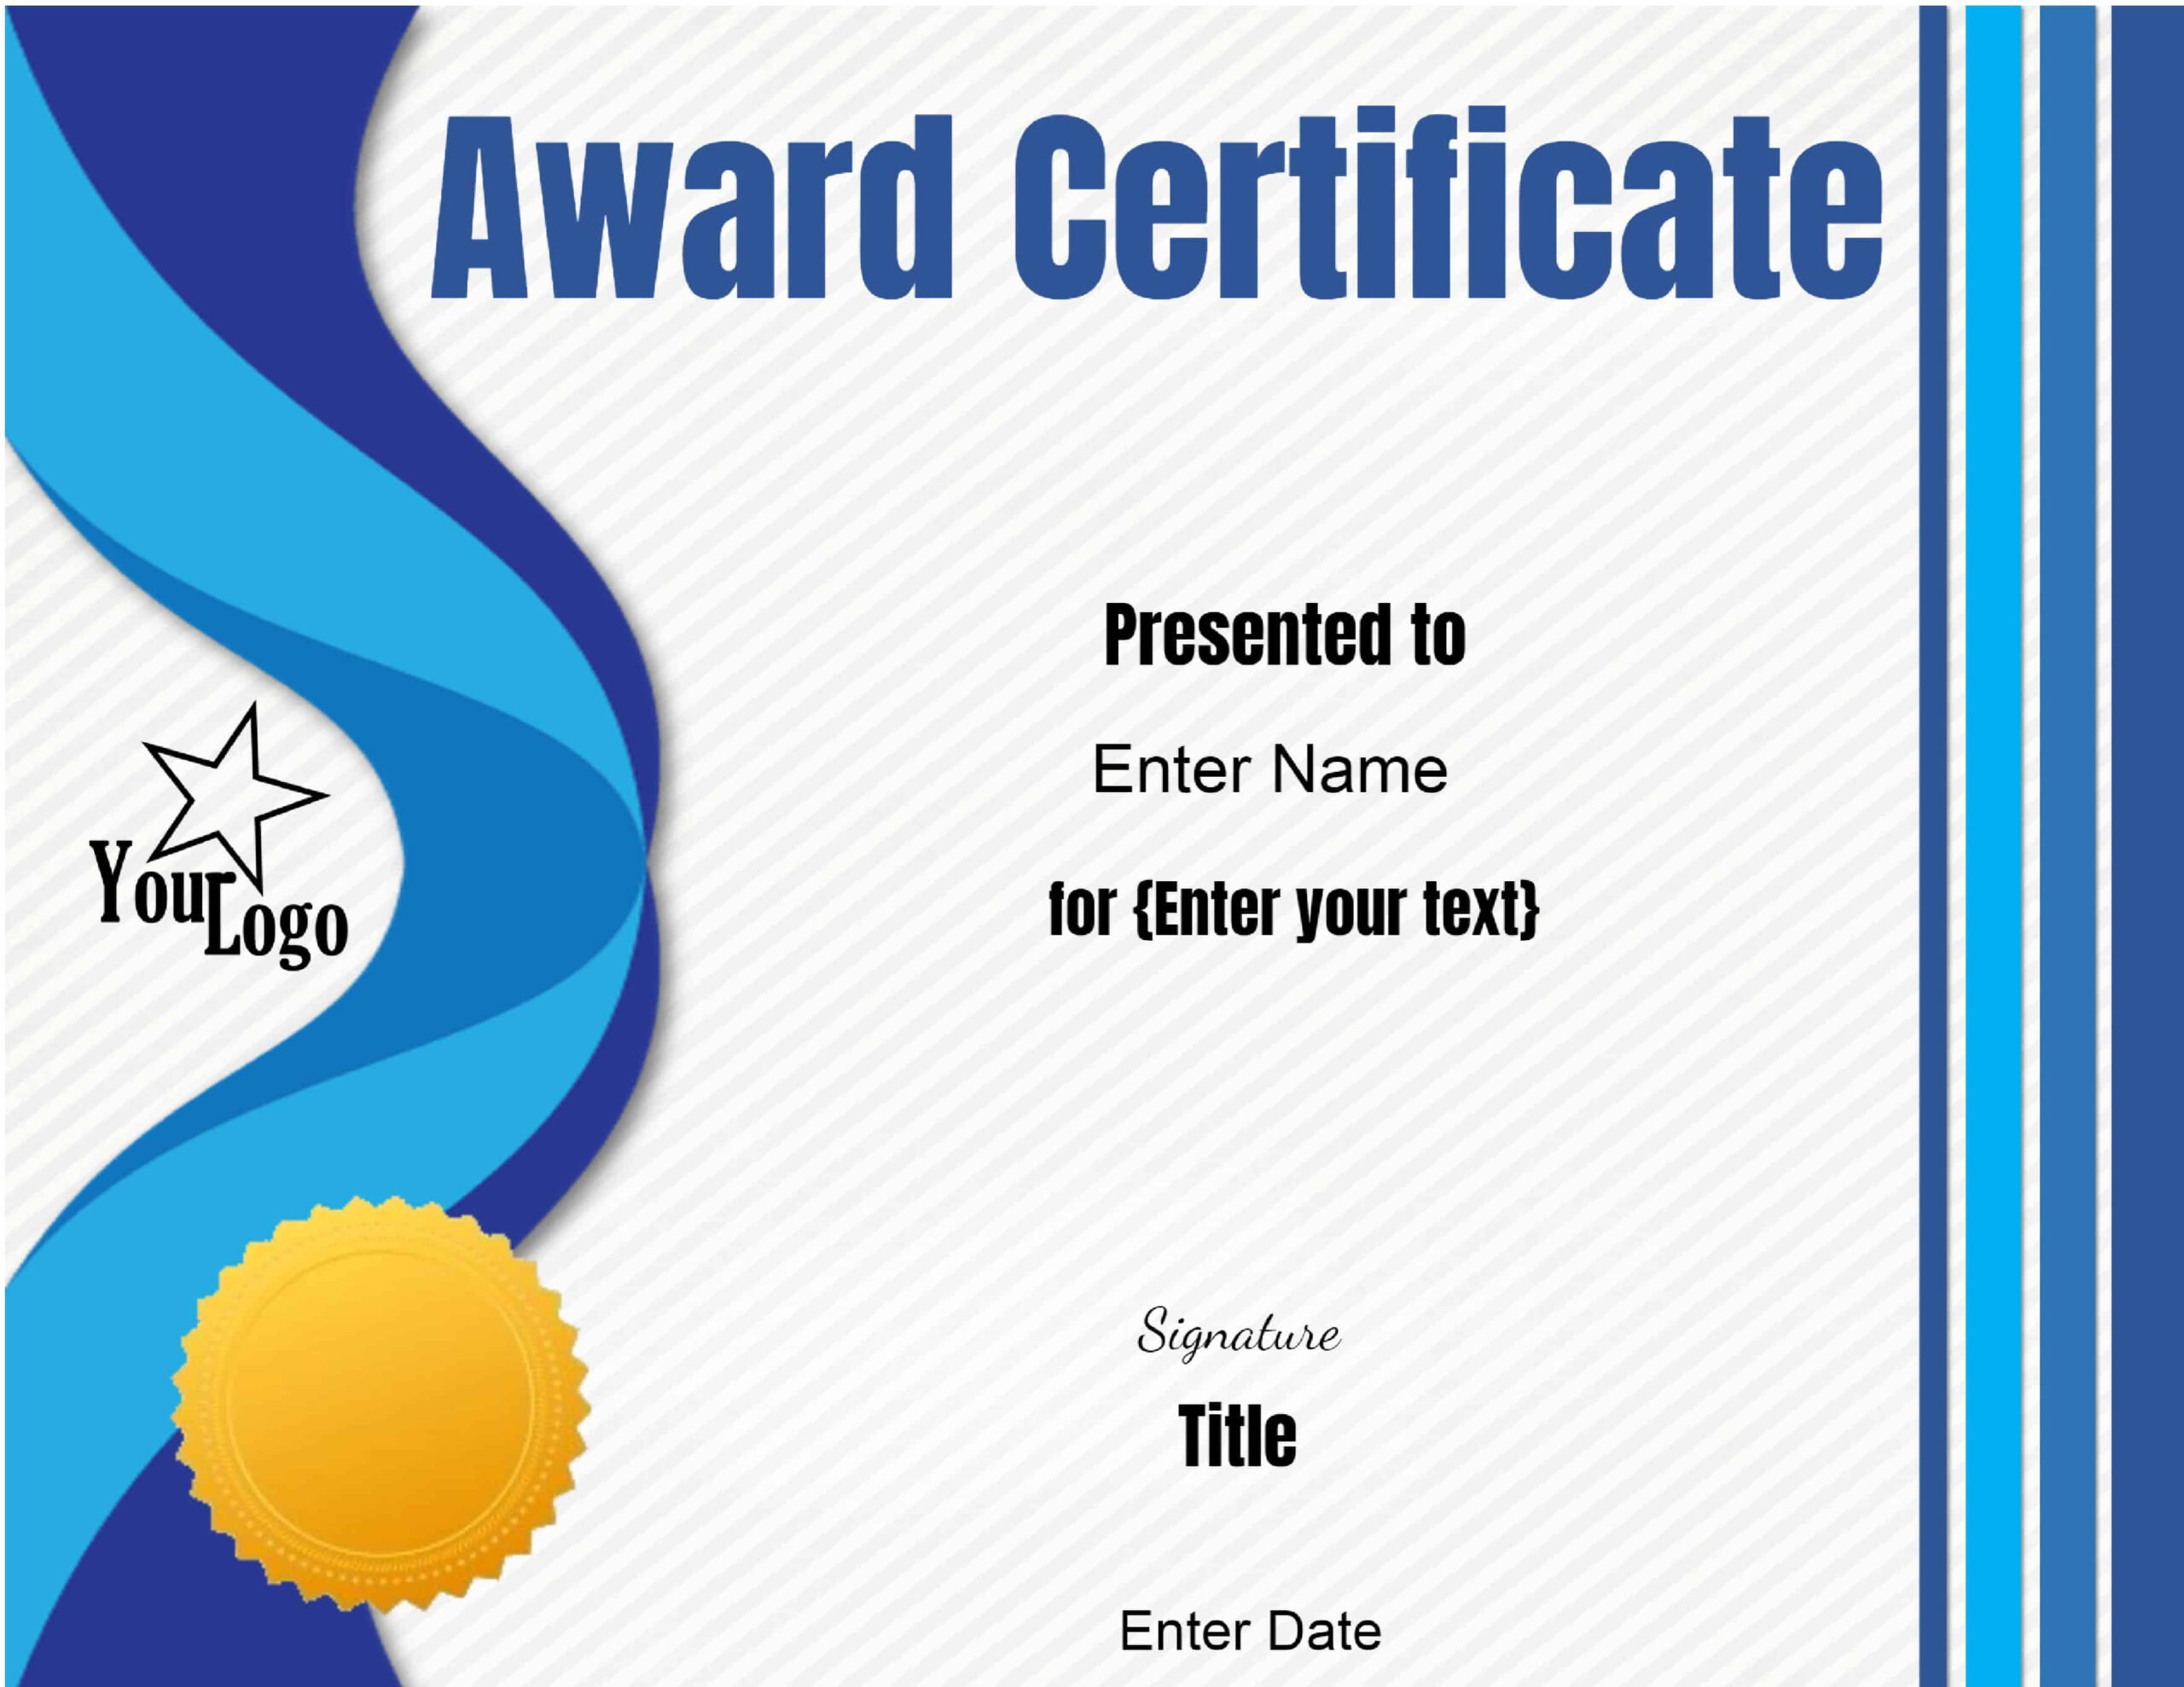 Free Editable Certificate Template | Customize Online &amp; Print At Home pertaining to Amazing Design A Certificate Template